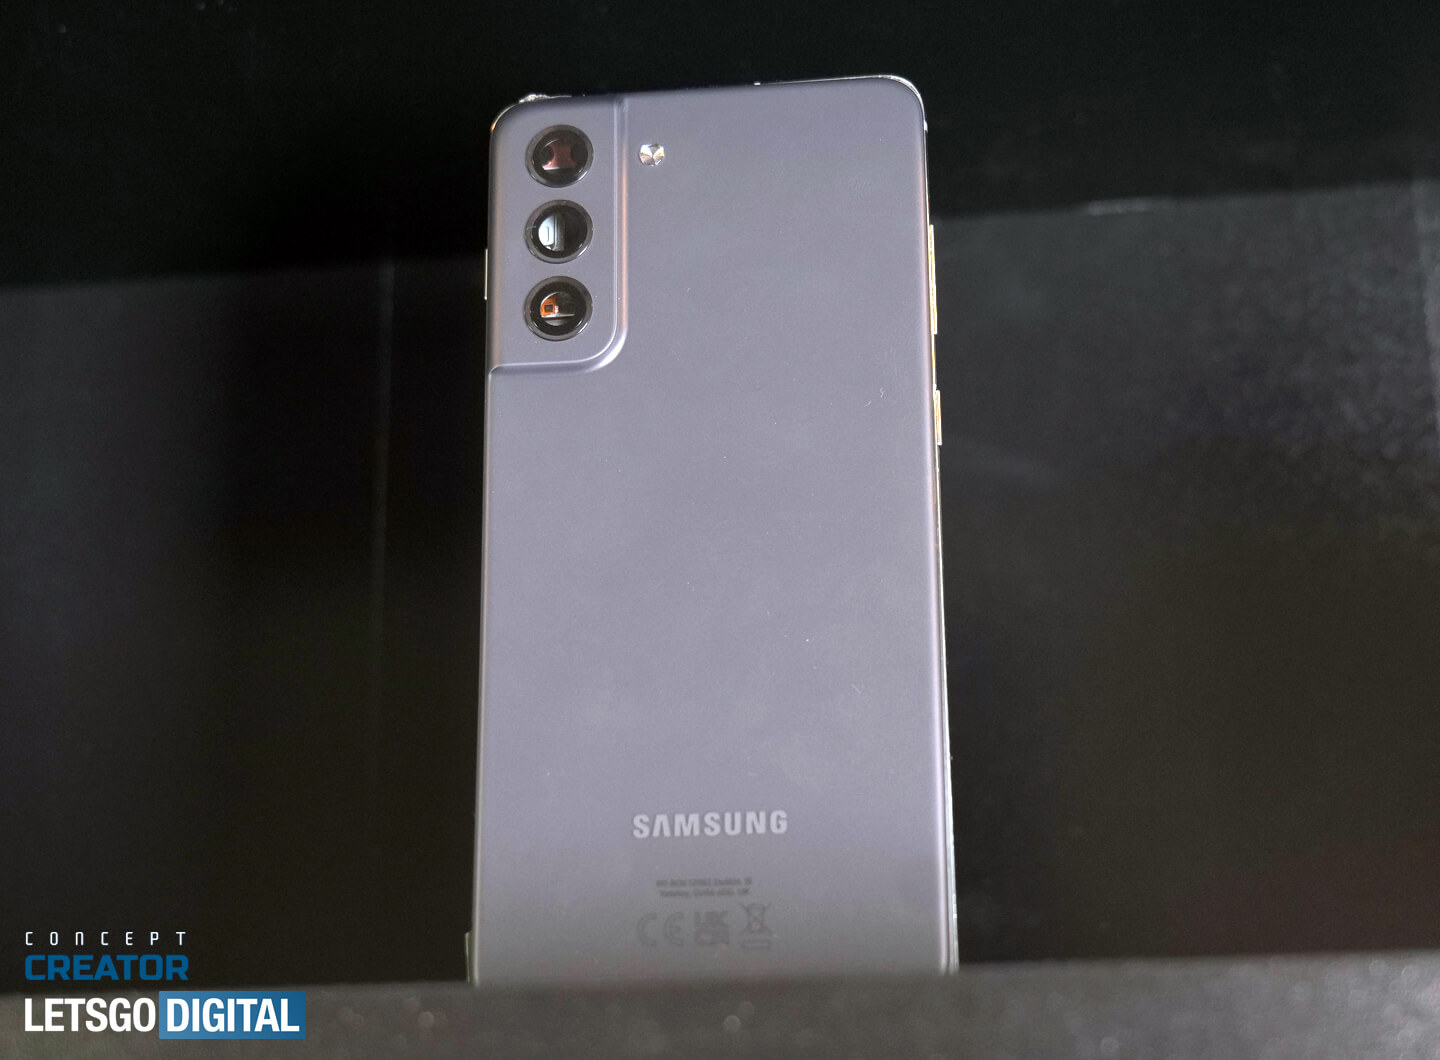 Samsung S21 FE Hands-on video